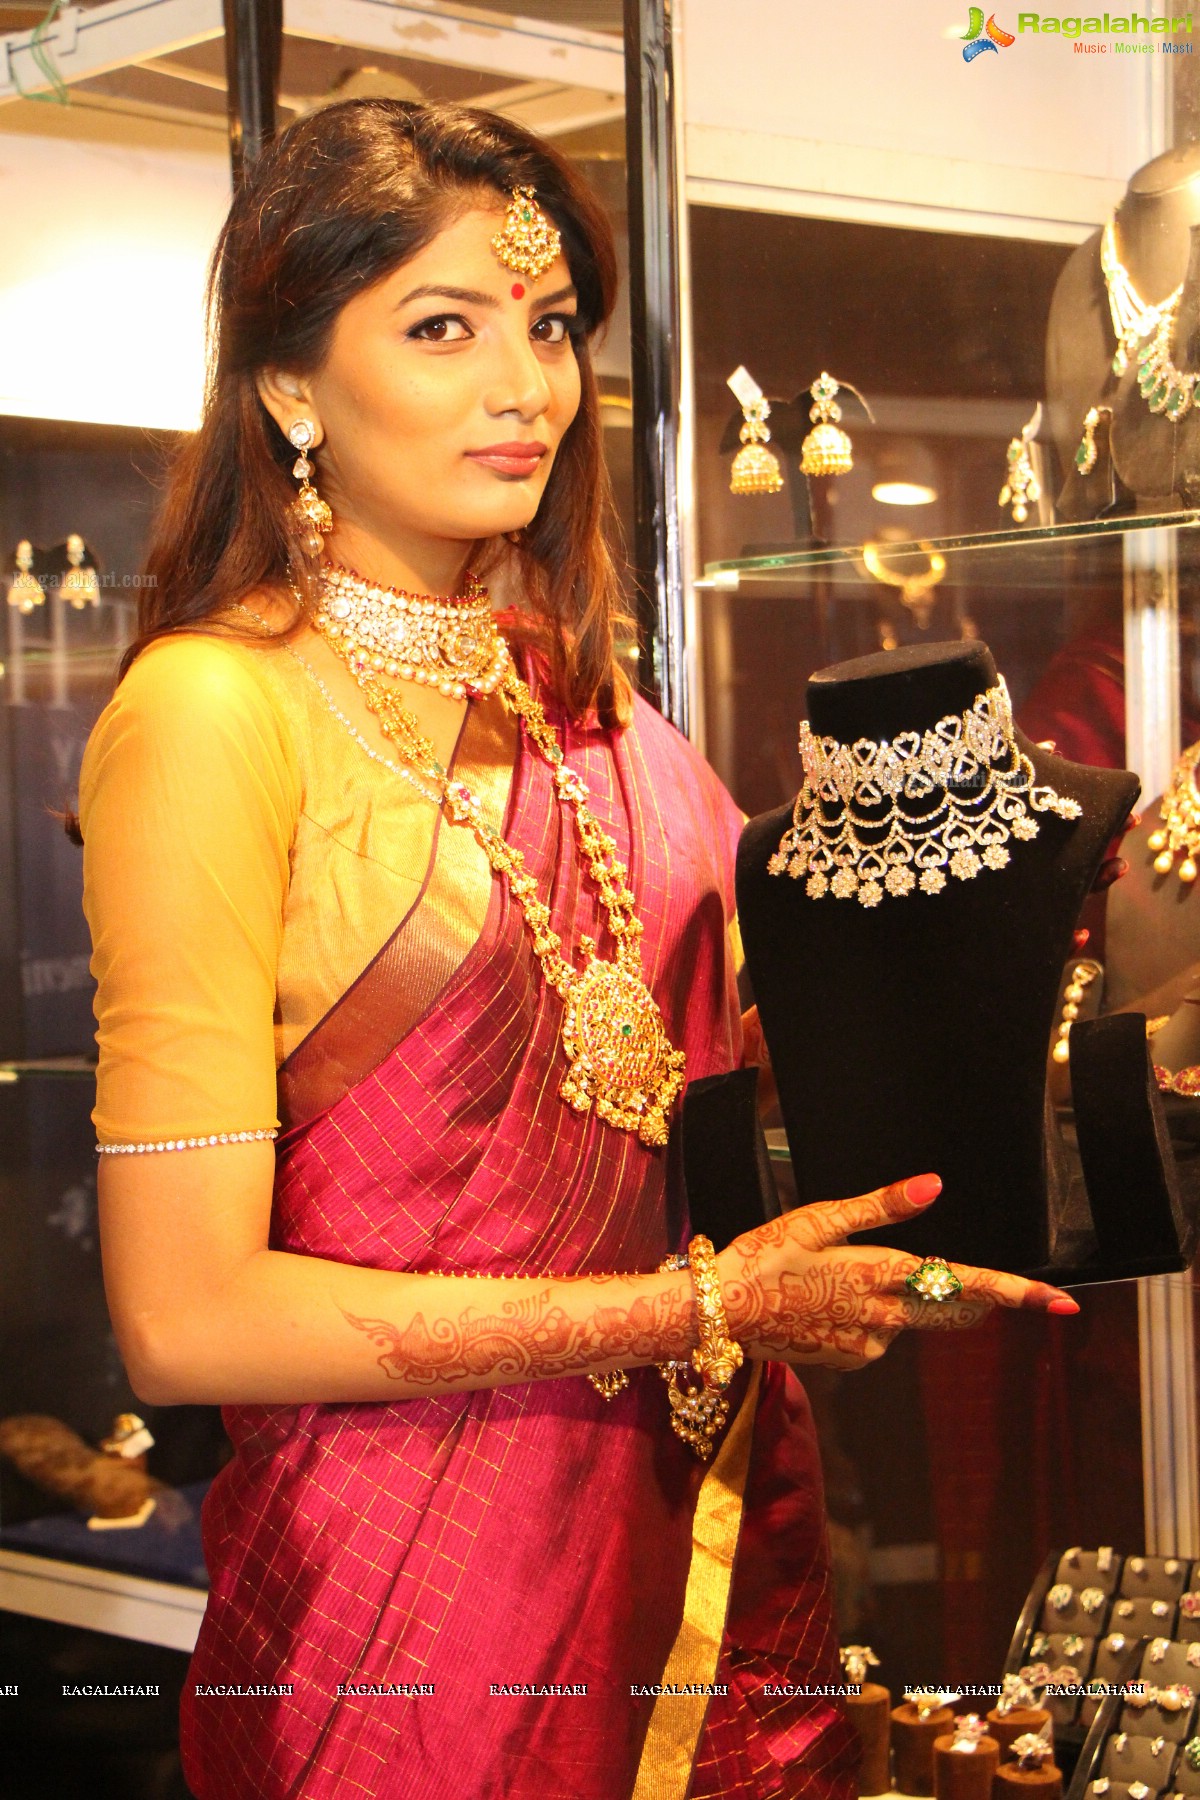 Jewels of Asia - The Couture Show Exhibition 2014